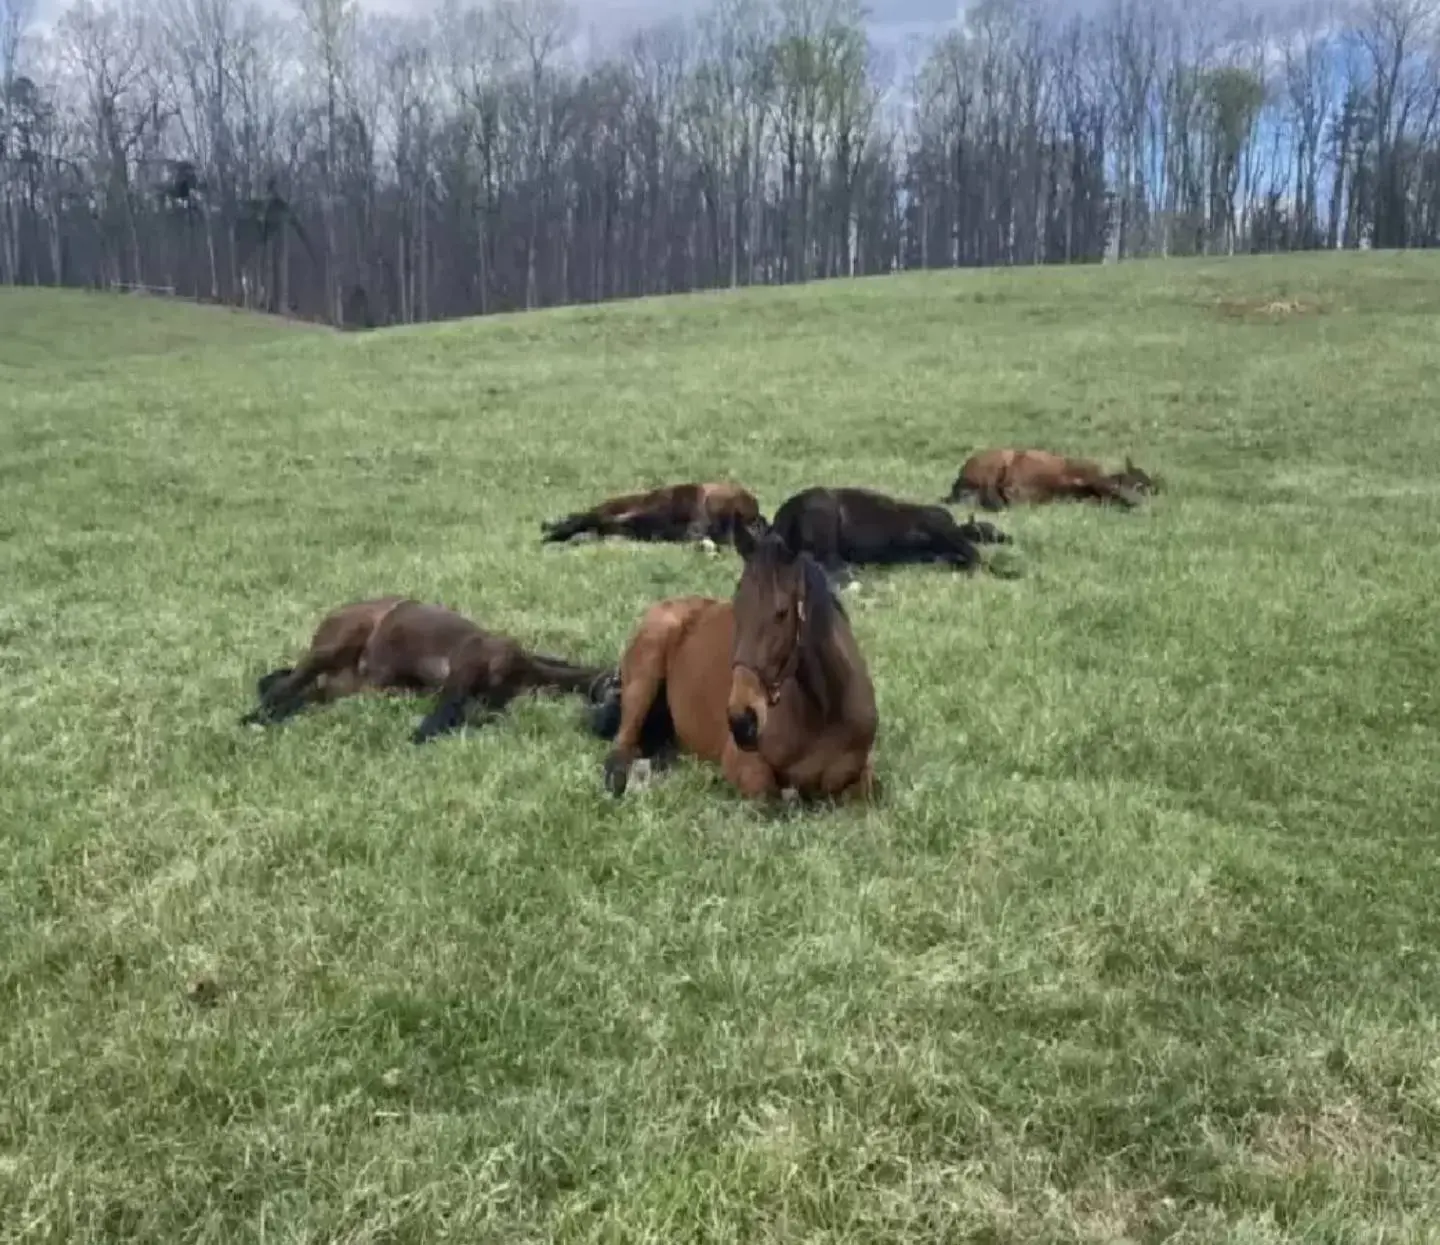 A group of animals laying in the grass.